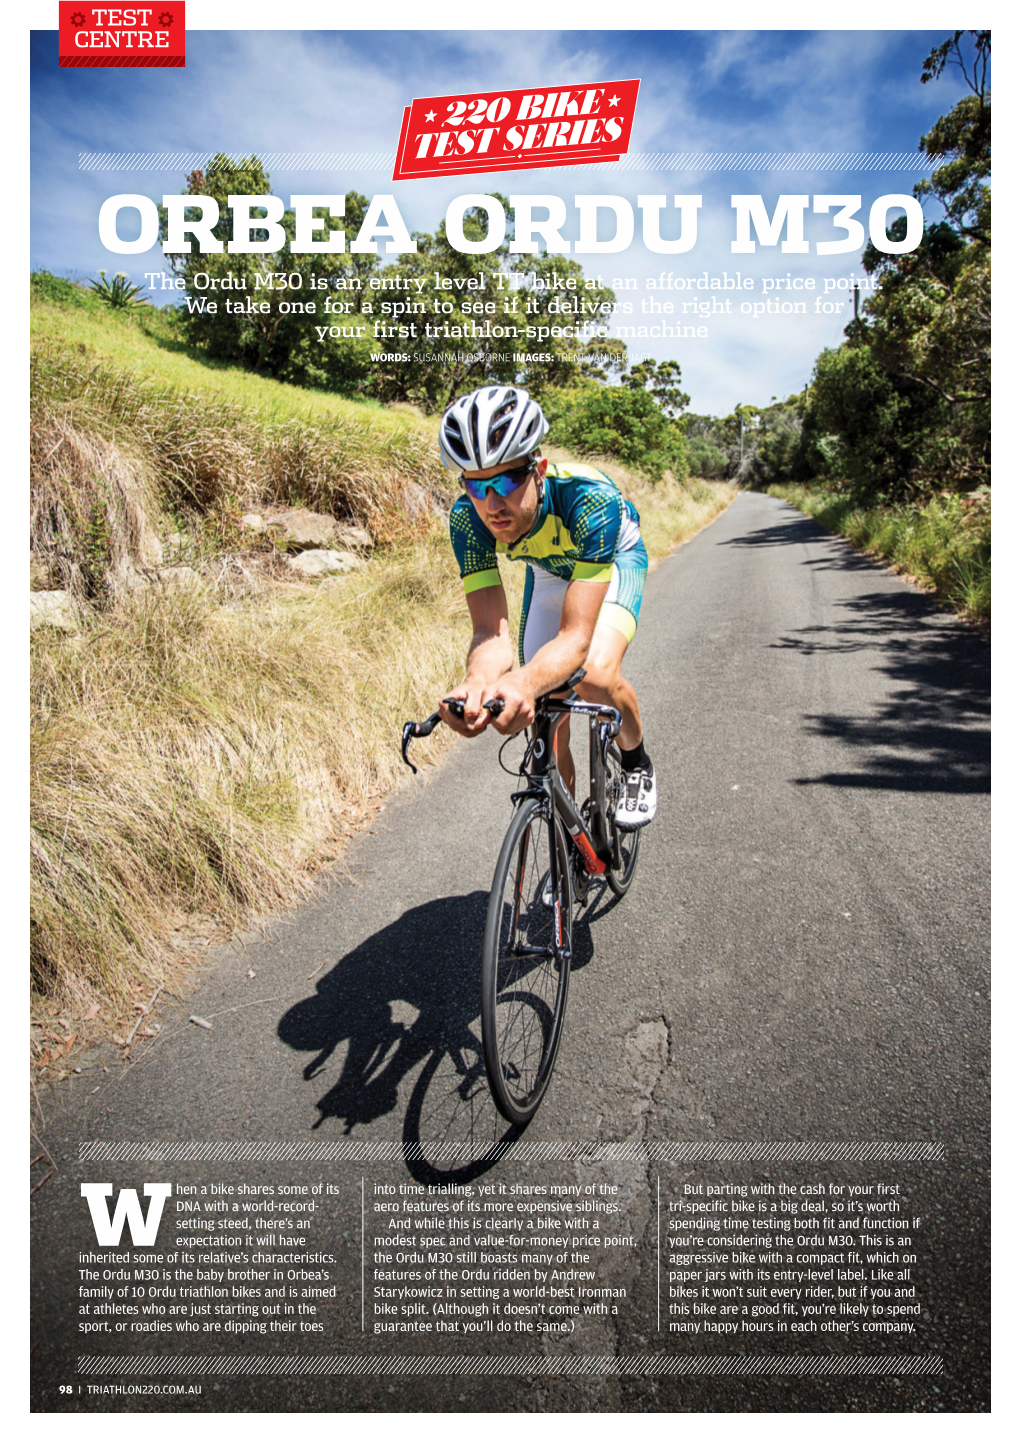 ORBEA ORDU M30 the Ordu M30 Is an Entry Level TT Bike at an Affordable Price Point